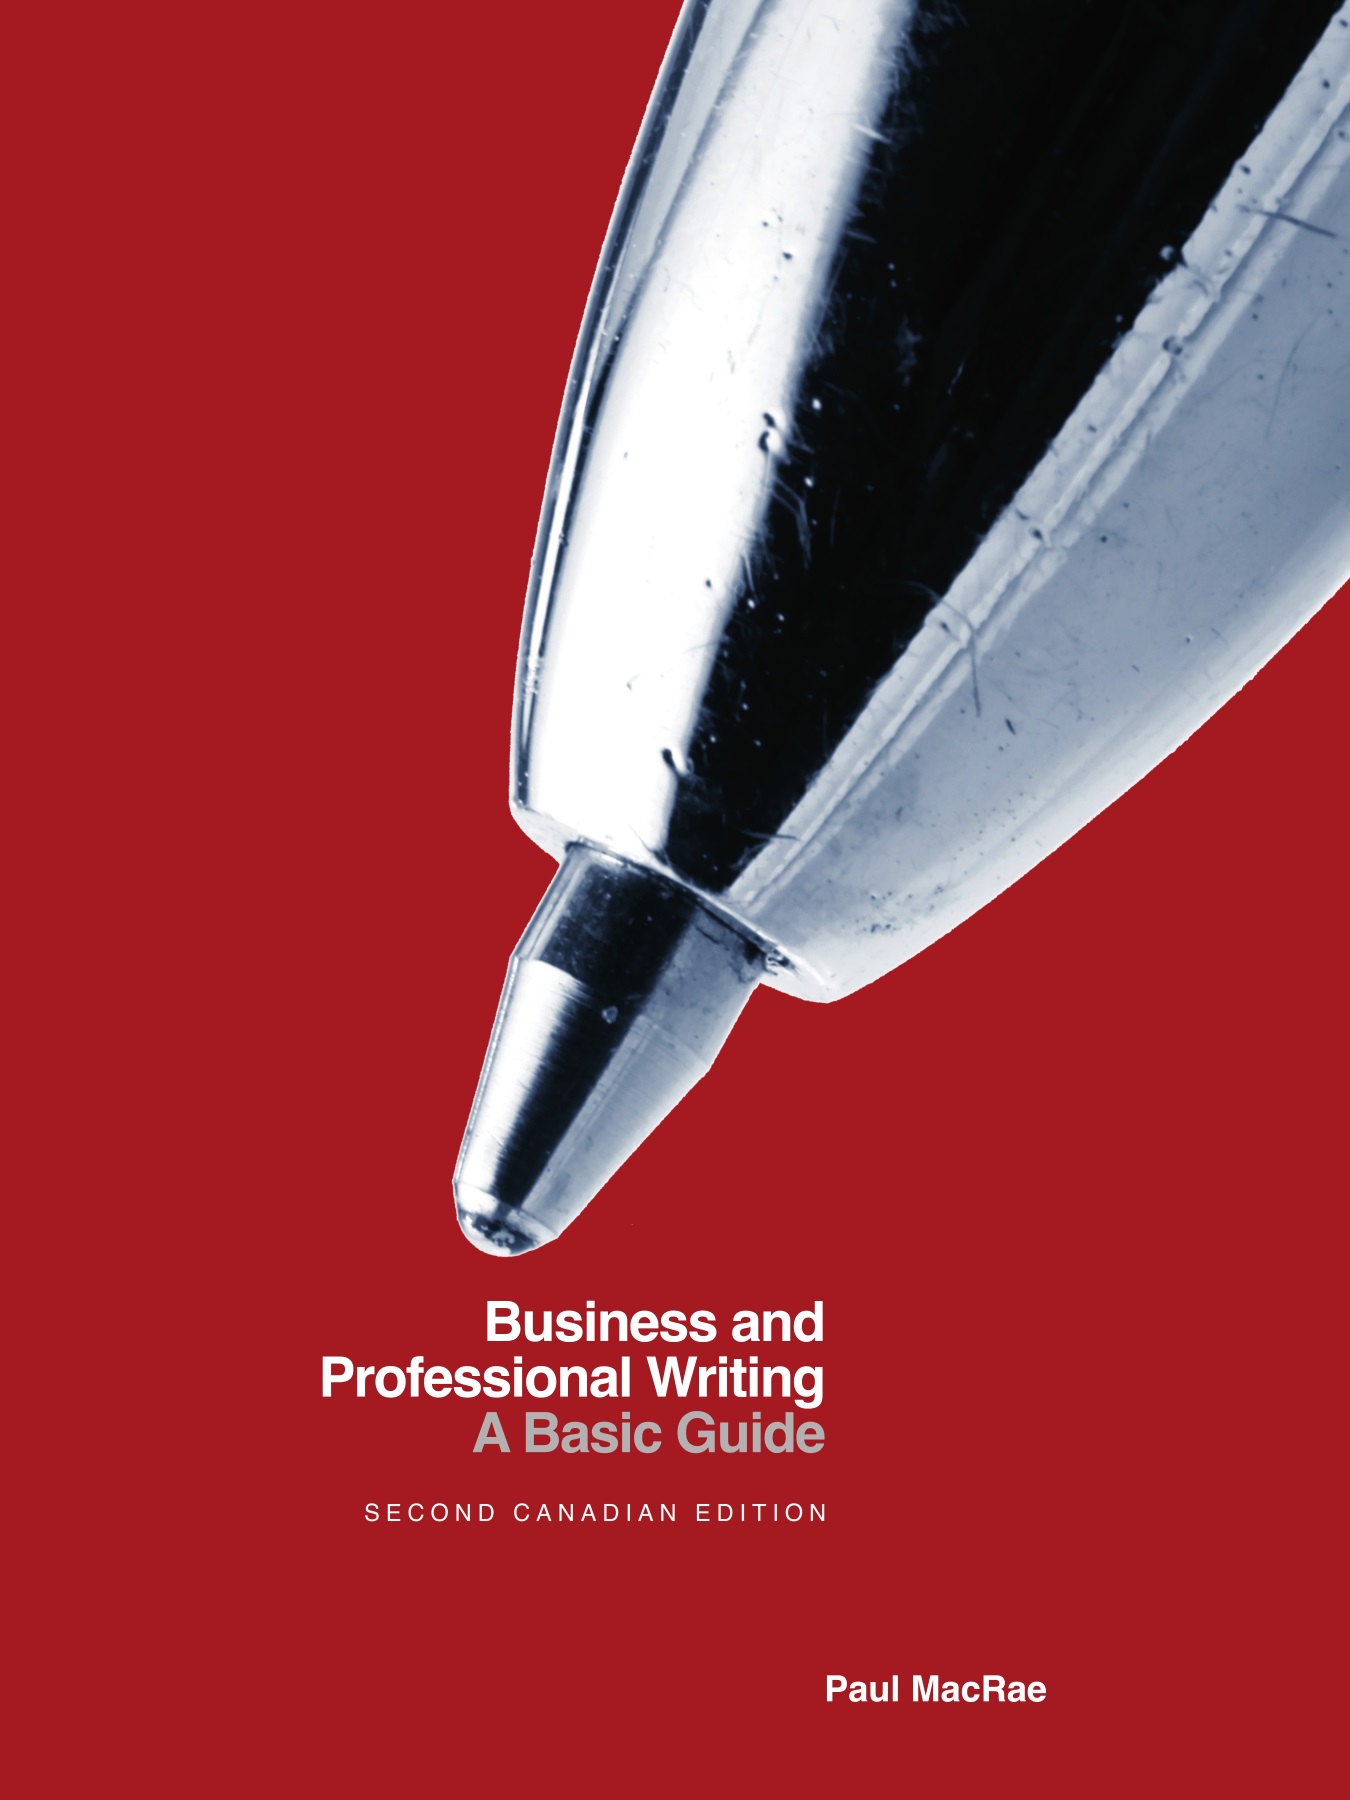 business-and-professional-writing-a-basic-guide-second-canadian